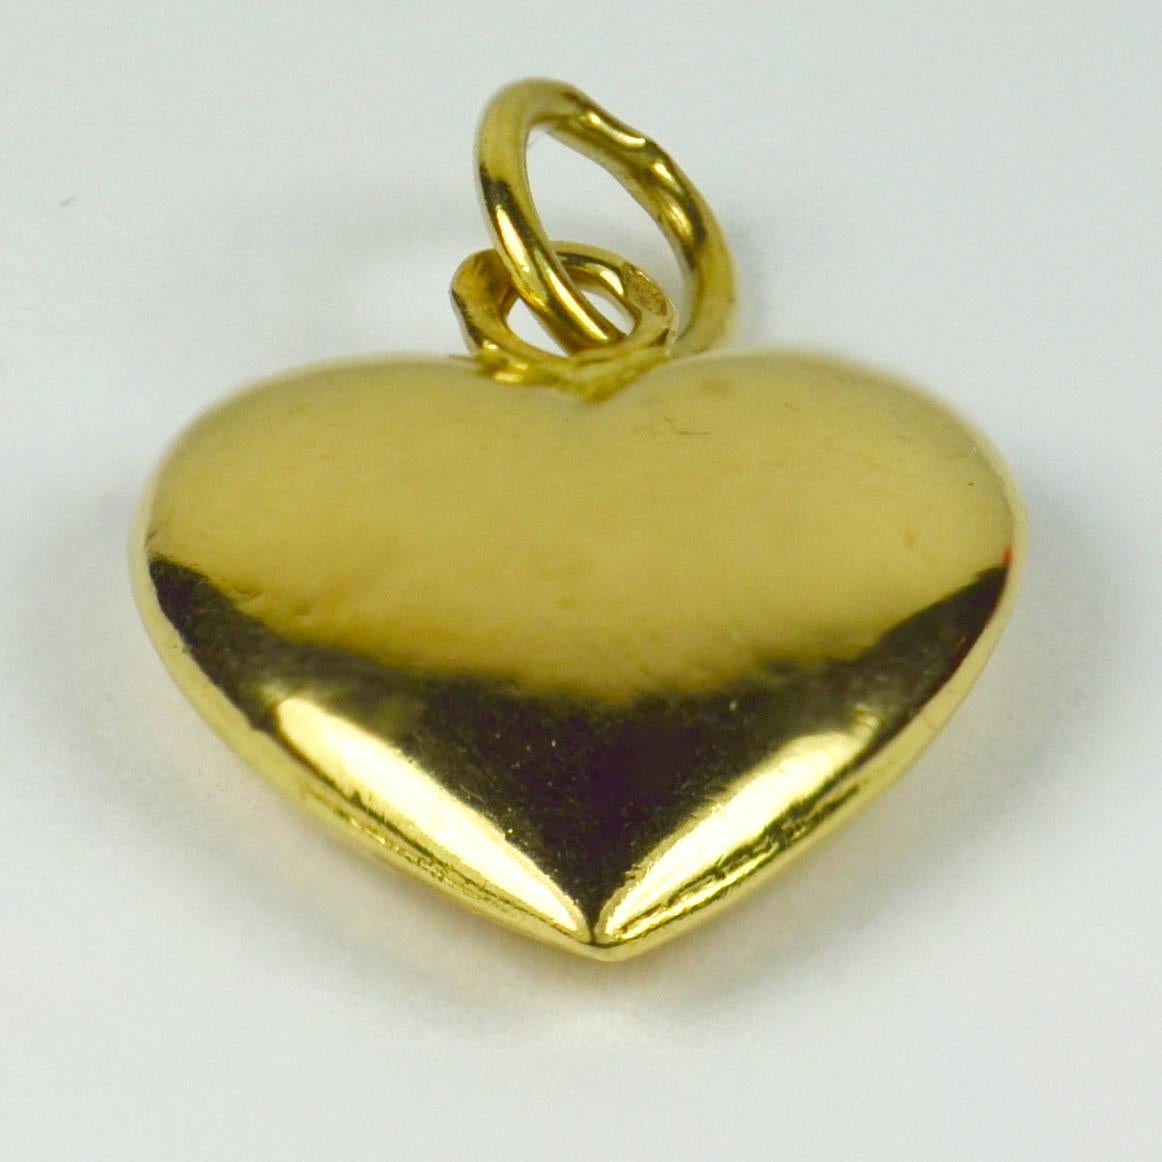 A French 18 karat (18K) yellow gold charm pendant designed as a puffy heart. Stamped with the eagle's head for 18 karat gold and French manufacture.

Dimensions: 2 x 1.3 x 0.4 cm
Weight: 0.75 grams